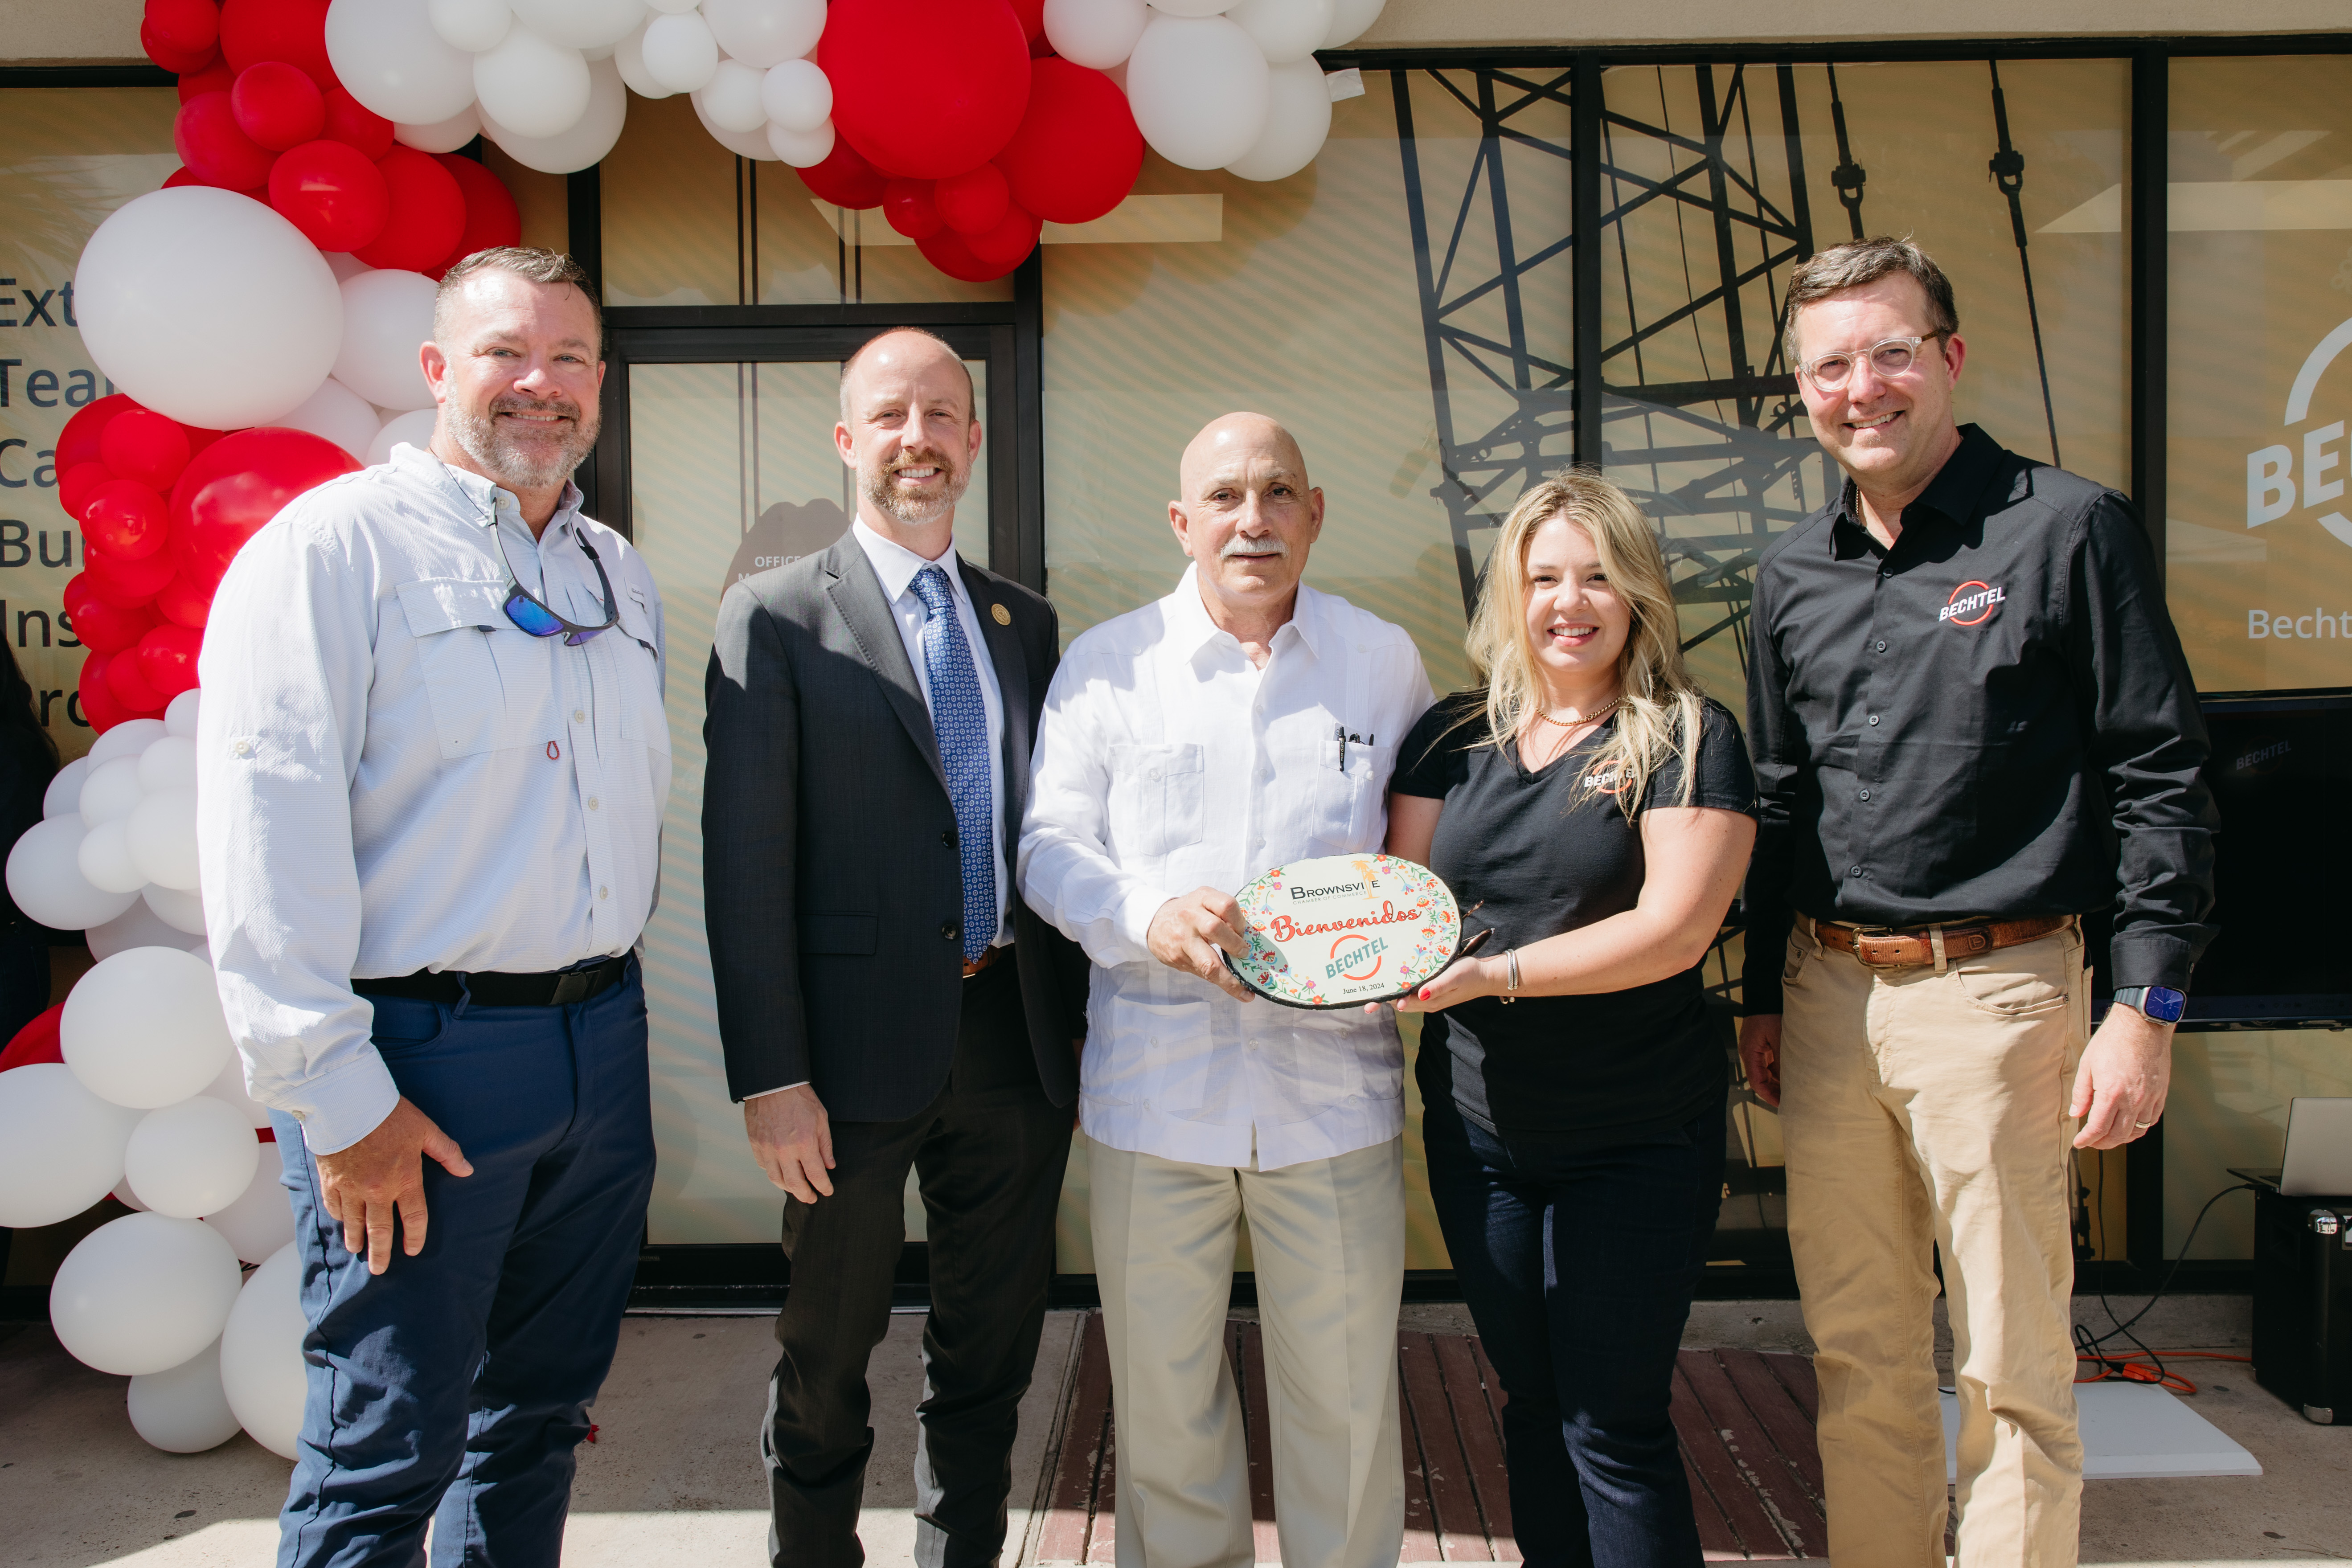 Pictured from left to right, Mike Demers, Deputy Site Manager, RGLNG, Brownsville Mayor John Cowen, Jr., Charles Cappello, Deputy Senior Project Manager, RGLNG, Monica Tellam, Community Engagement & Social Performance Manager, and Steve Solberg, Site Manager, RGLNG. 